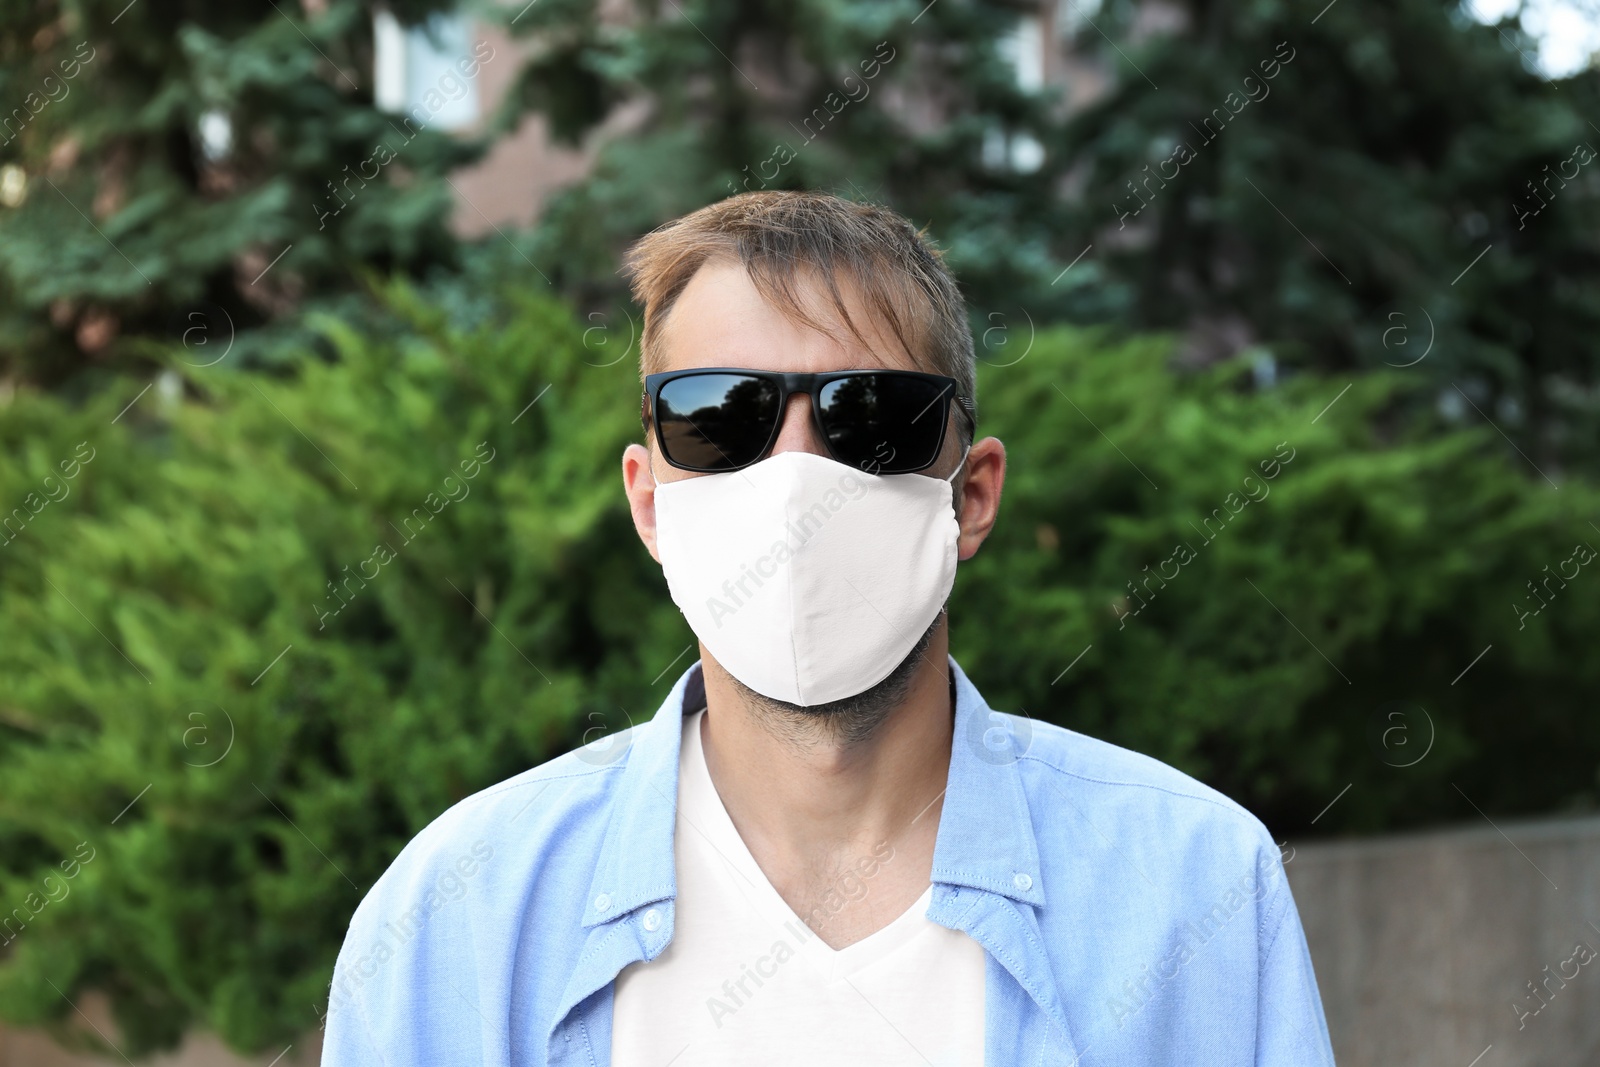 Photo of Man wearing handmade cloth mask outdoors. Personal protective equipment during COVID-19 pandemic